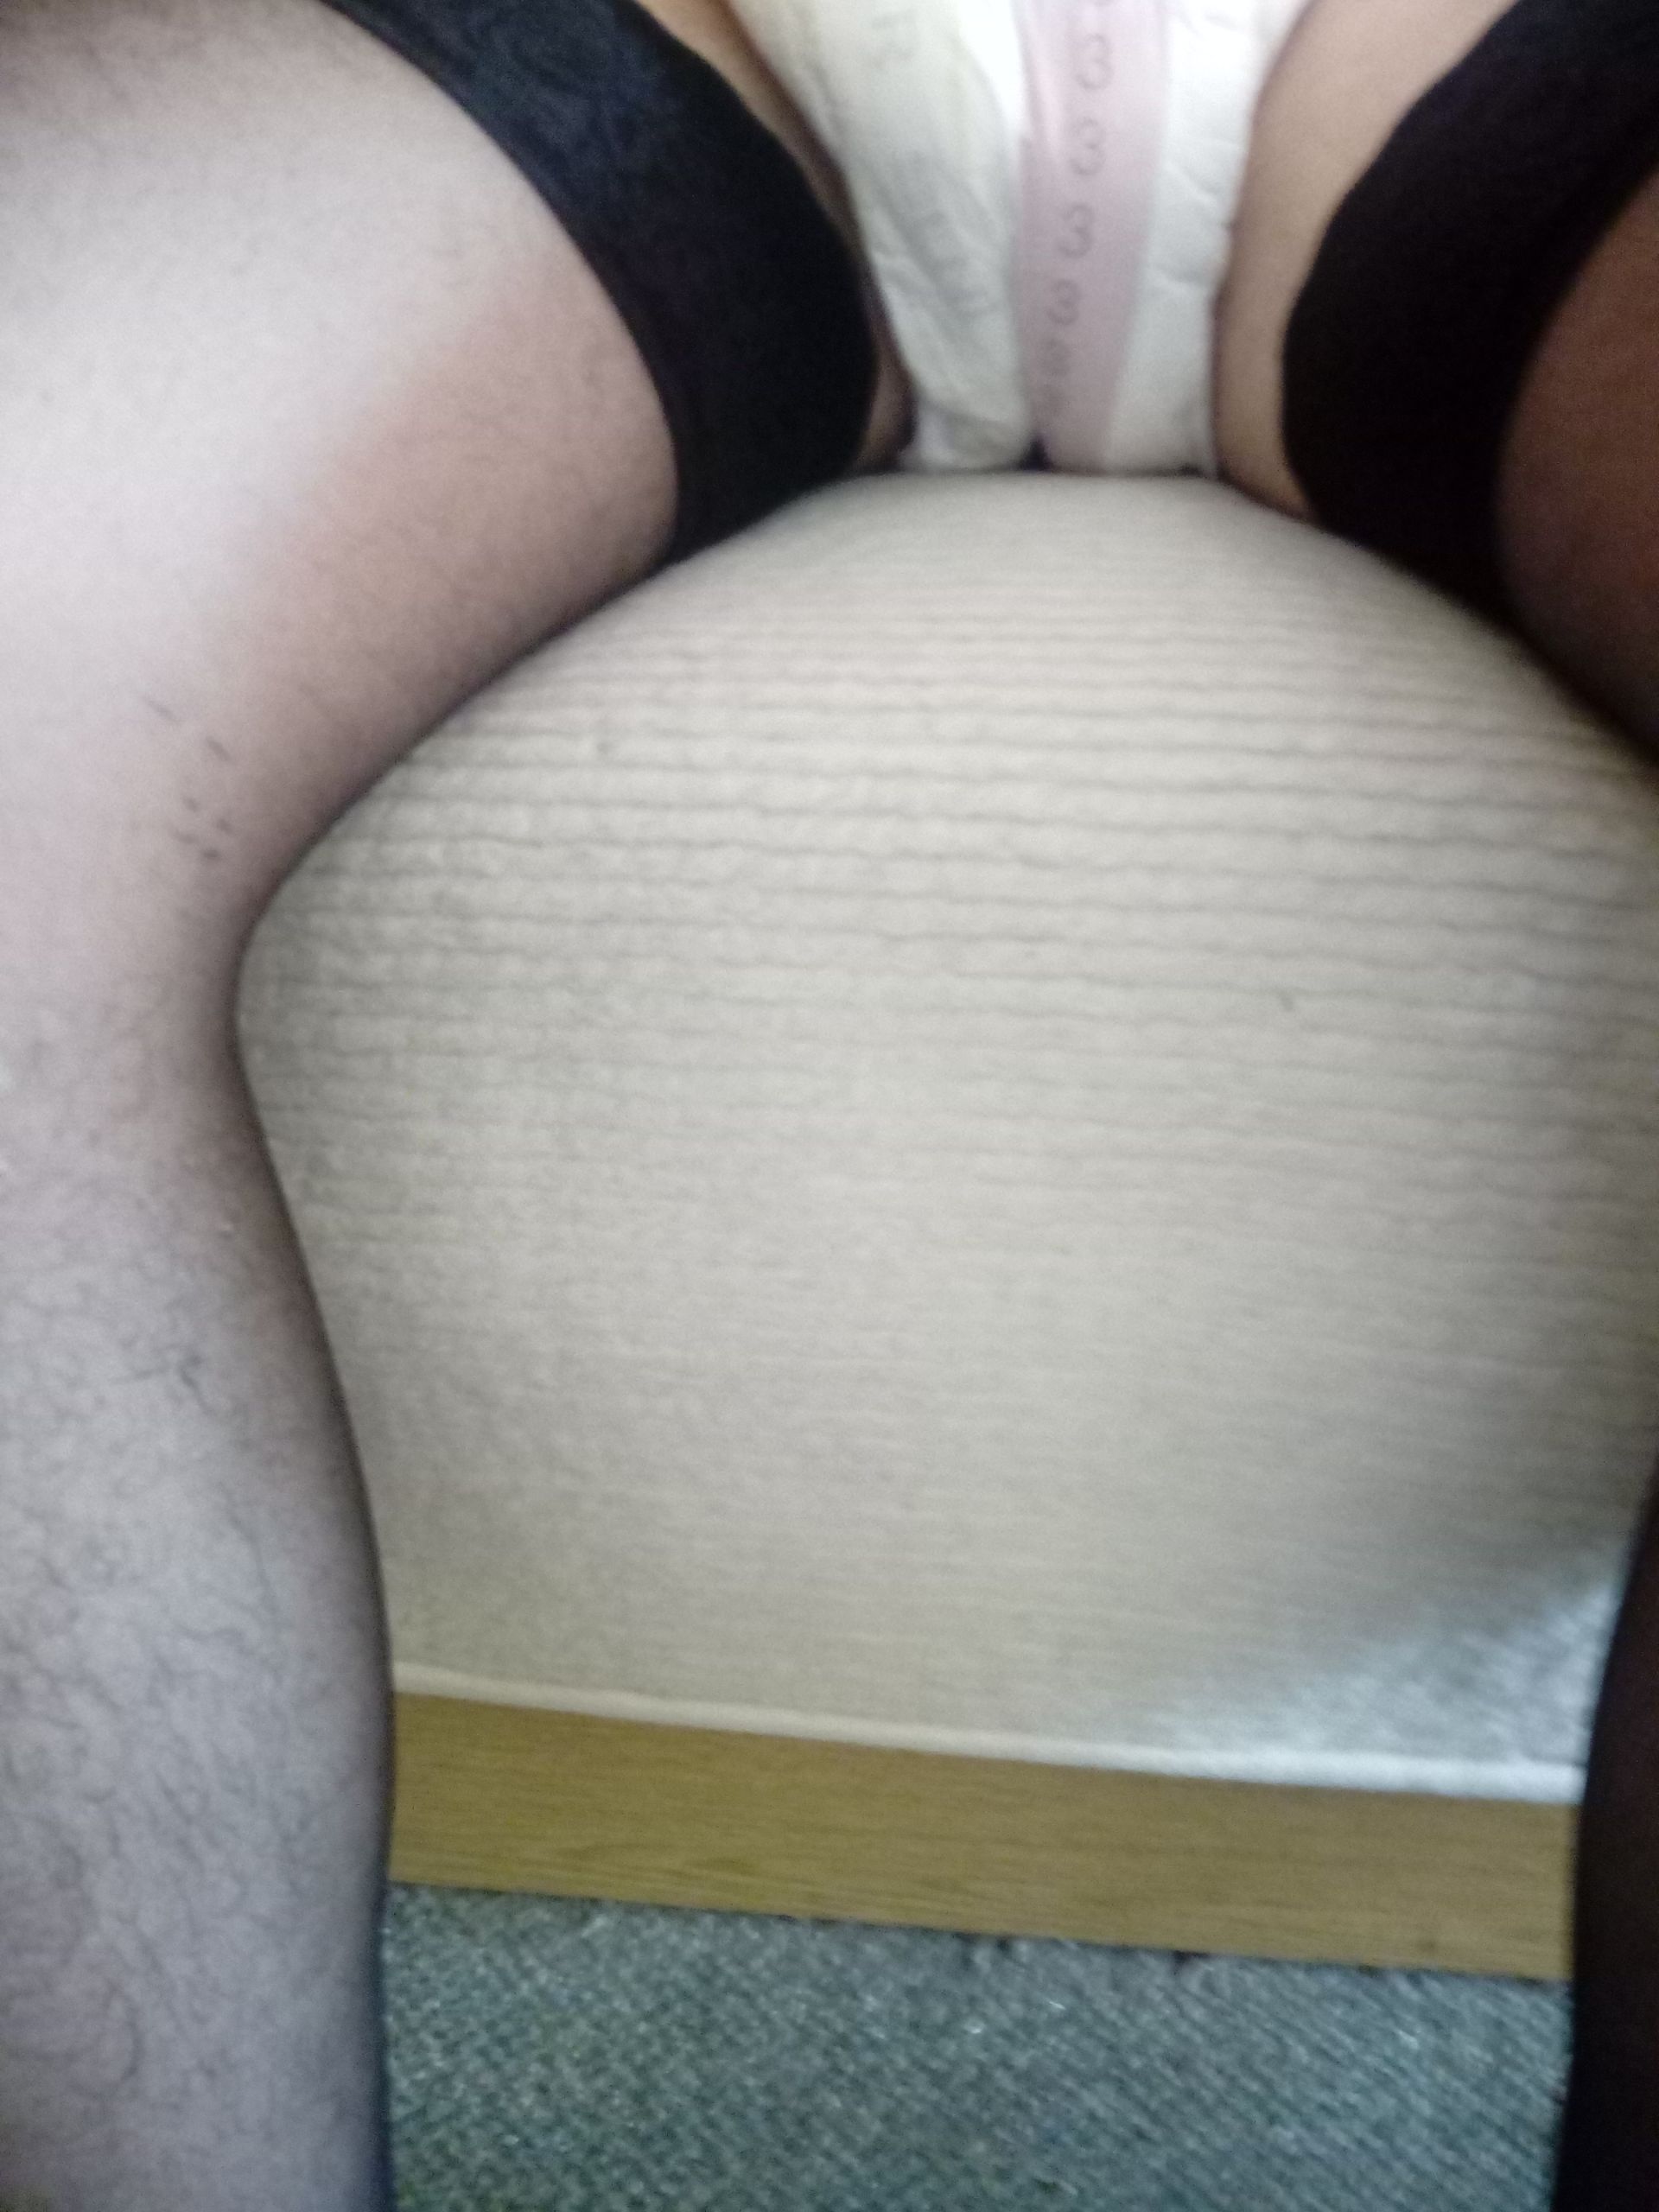 Diaper and stockings